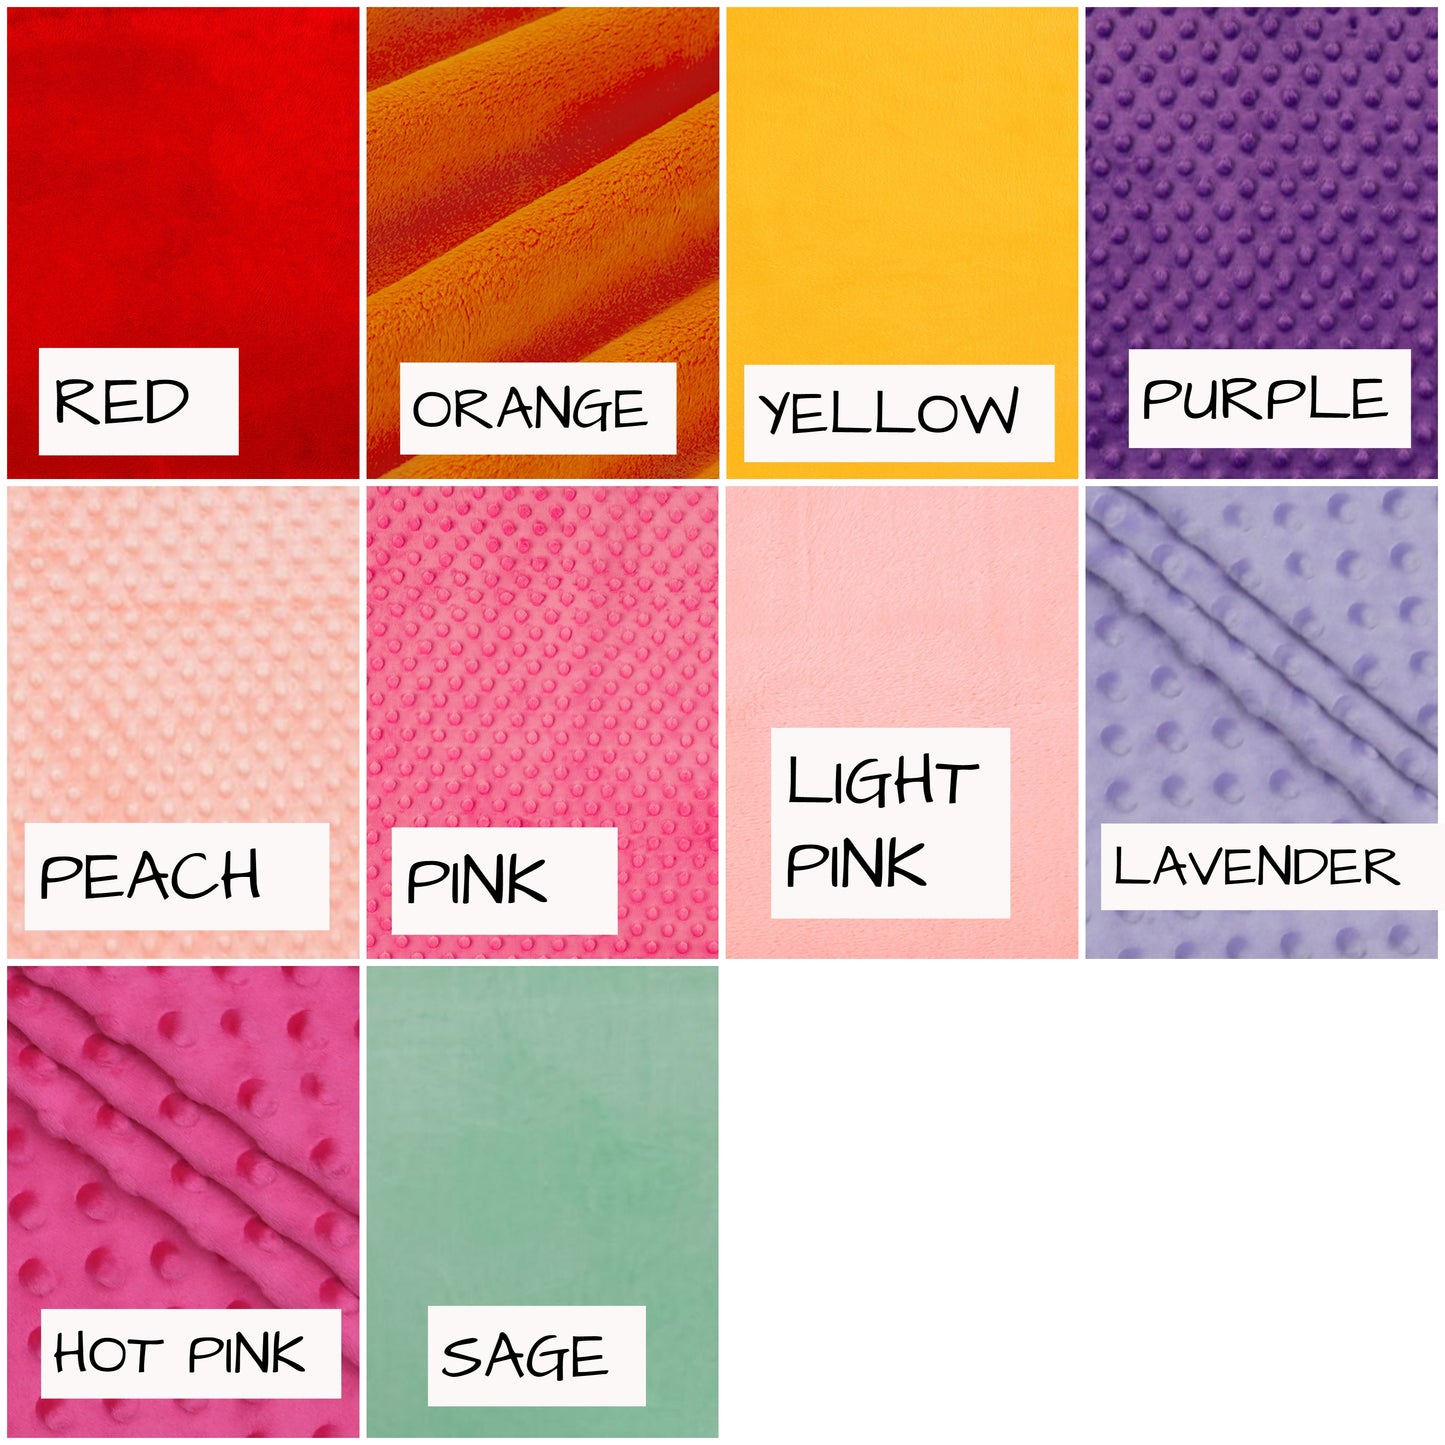 minky colors available - red, orange, yellow, purple. peach, pink, light pink, lavender, hot pink & sage.